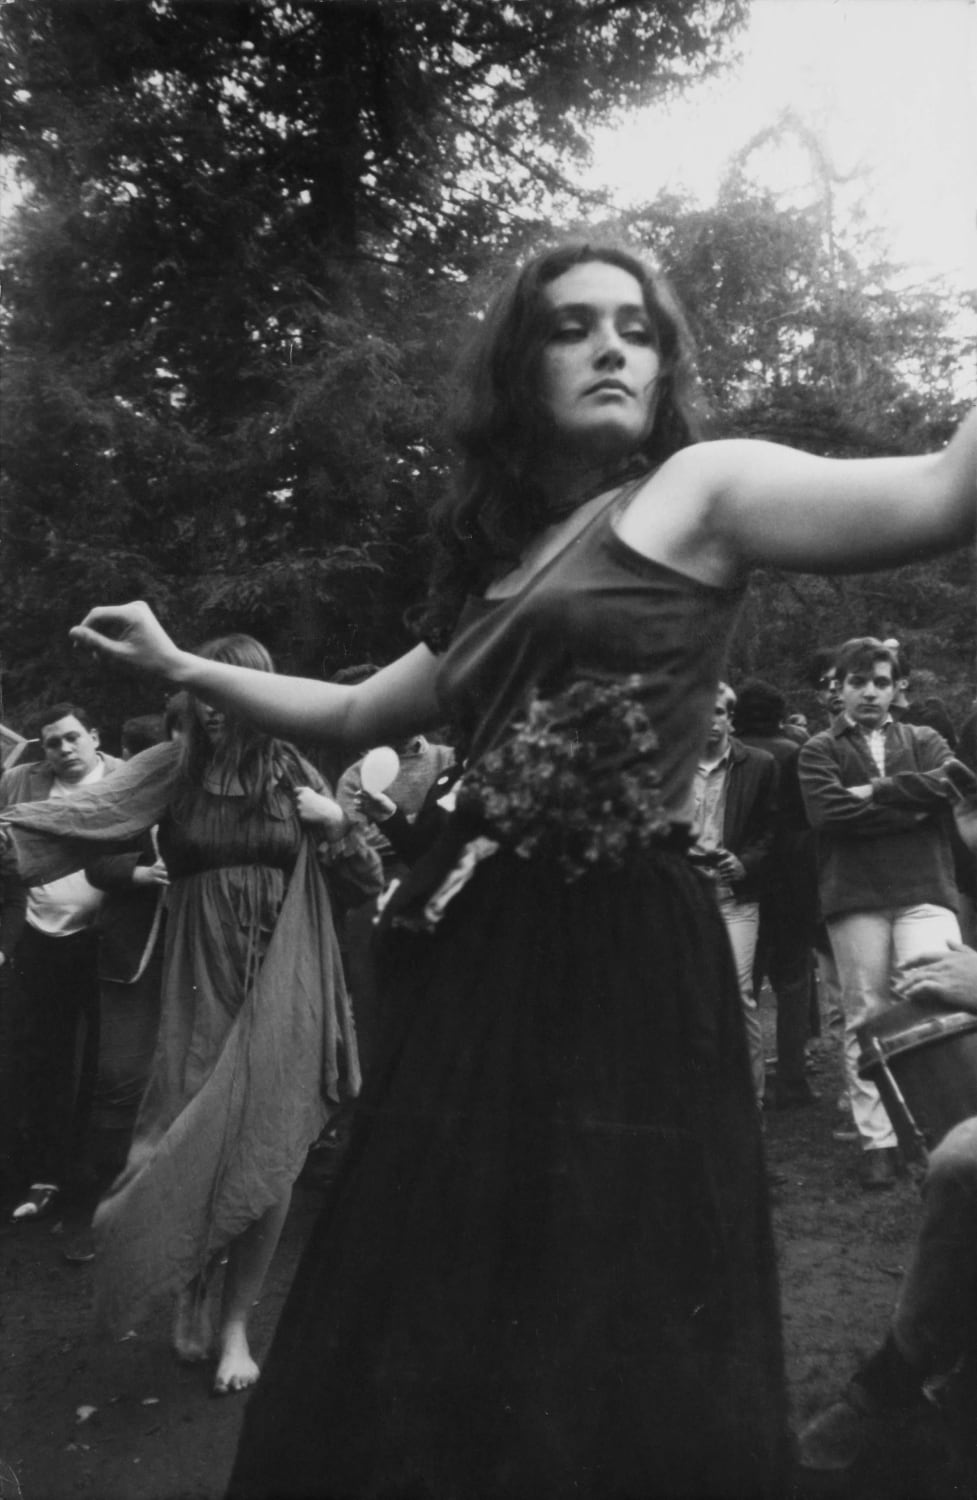 Hippie girl dancing, 1967. A photo by the talented Dennis Hopper